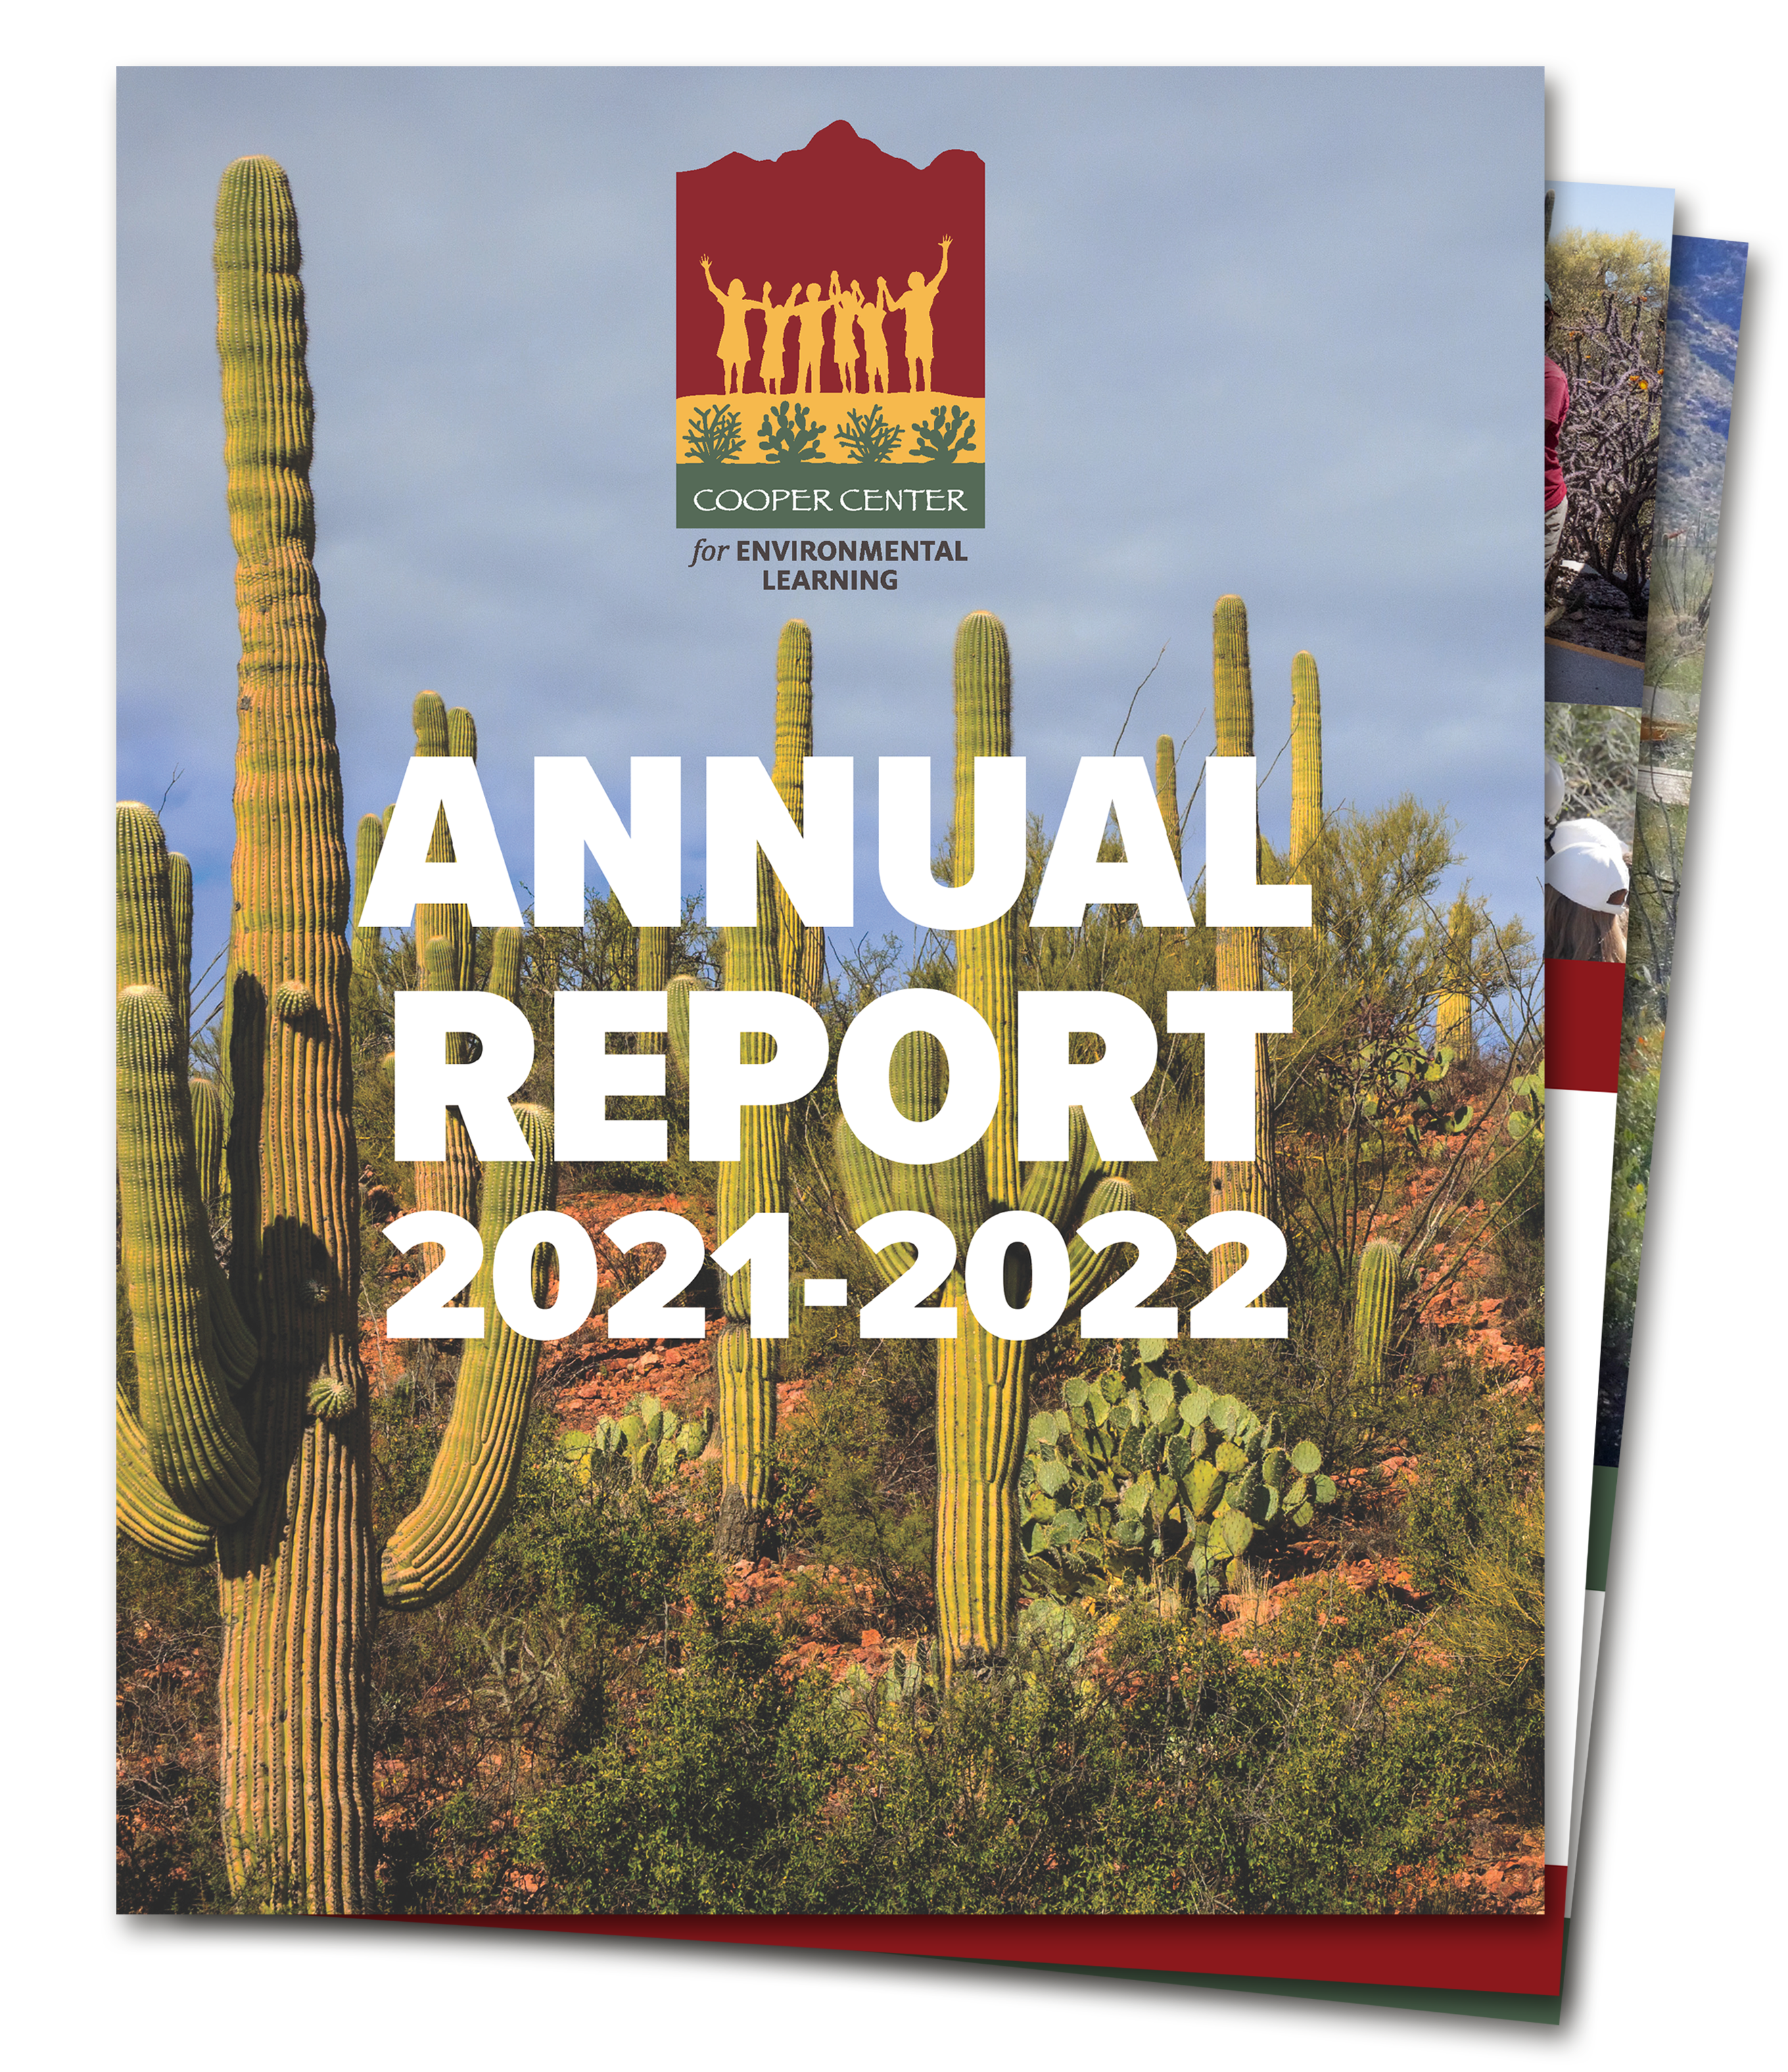 Photo showing the cover of the Cooper 2021-2022 Annual